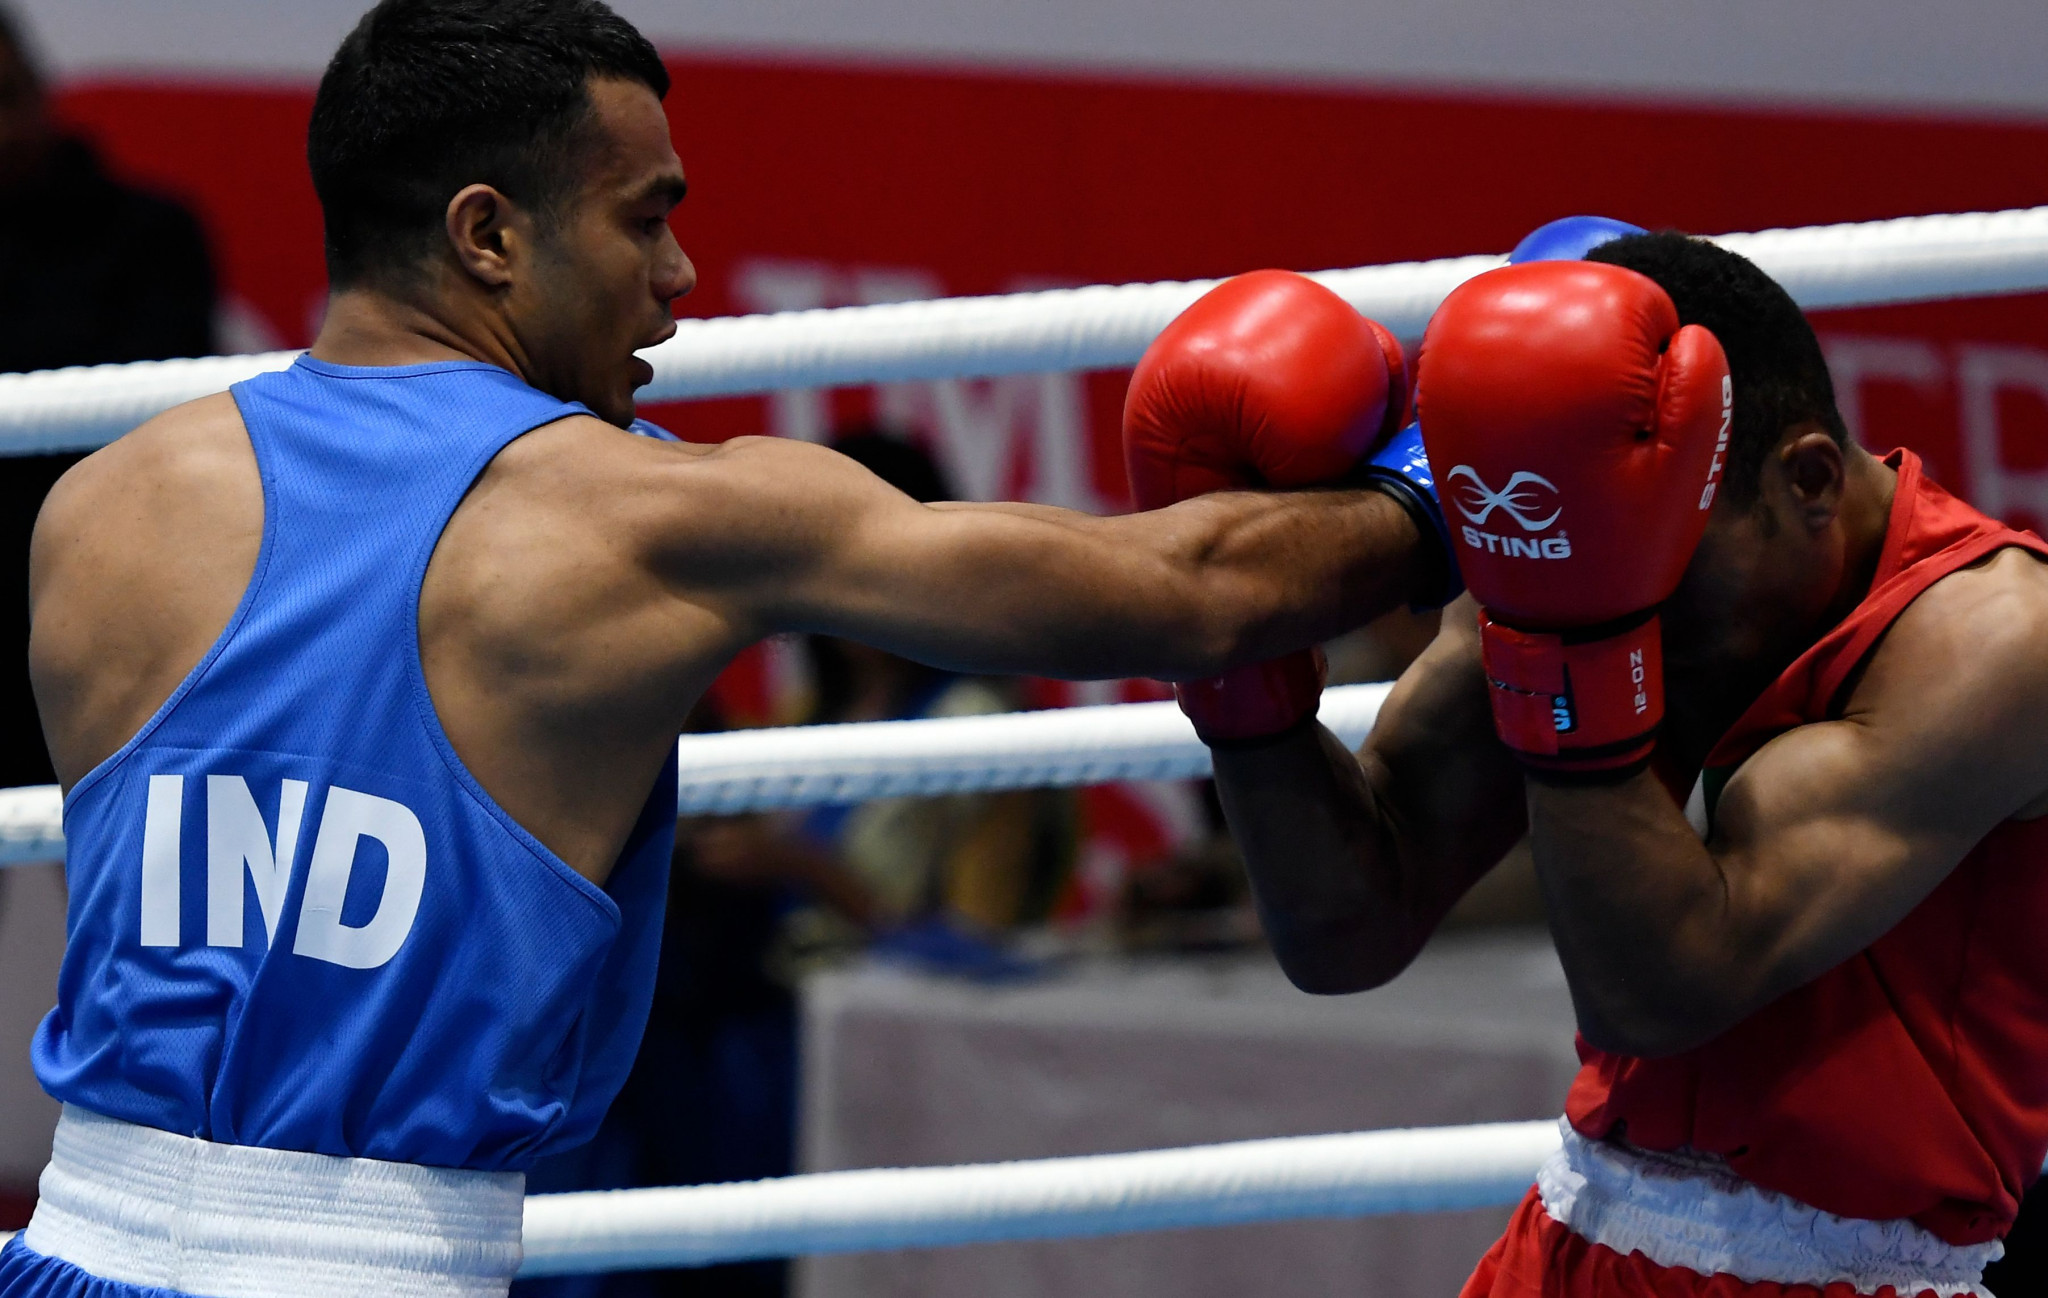 In a letter seen by insidethegames, the International Boxing Association reminded the Boxing Federation of India that "a national federation may be suspended if it fails to pay its debt" ©Getty Images